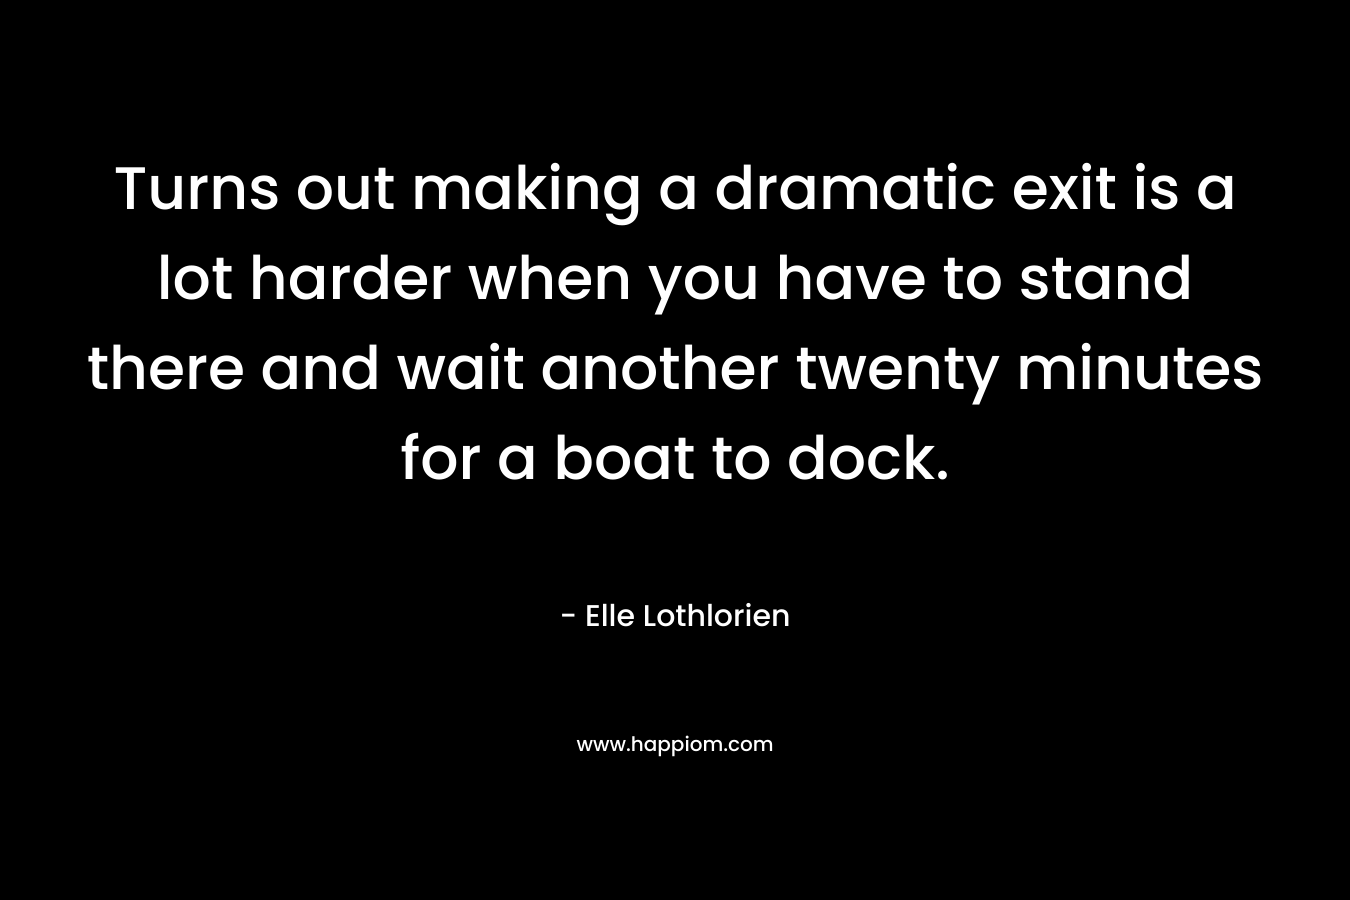 Turns out making a dramatic exit is a lot harder when you have to stand there and wait another twenty minutes for a boat to dock. – Elle Lothlorien